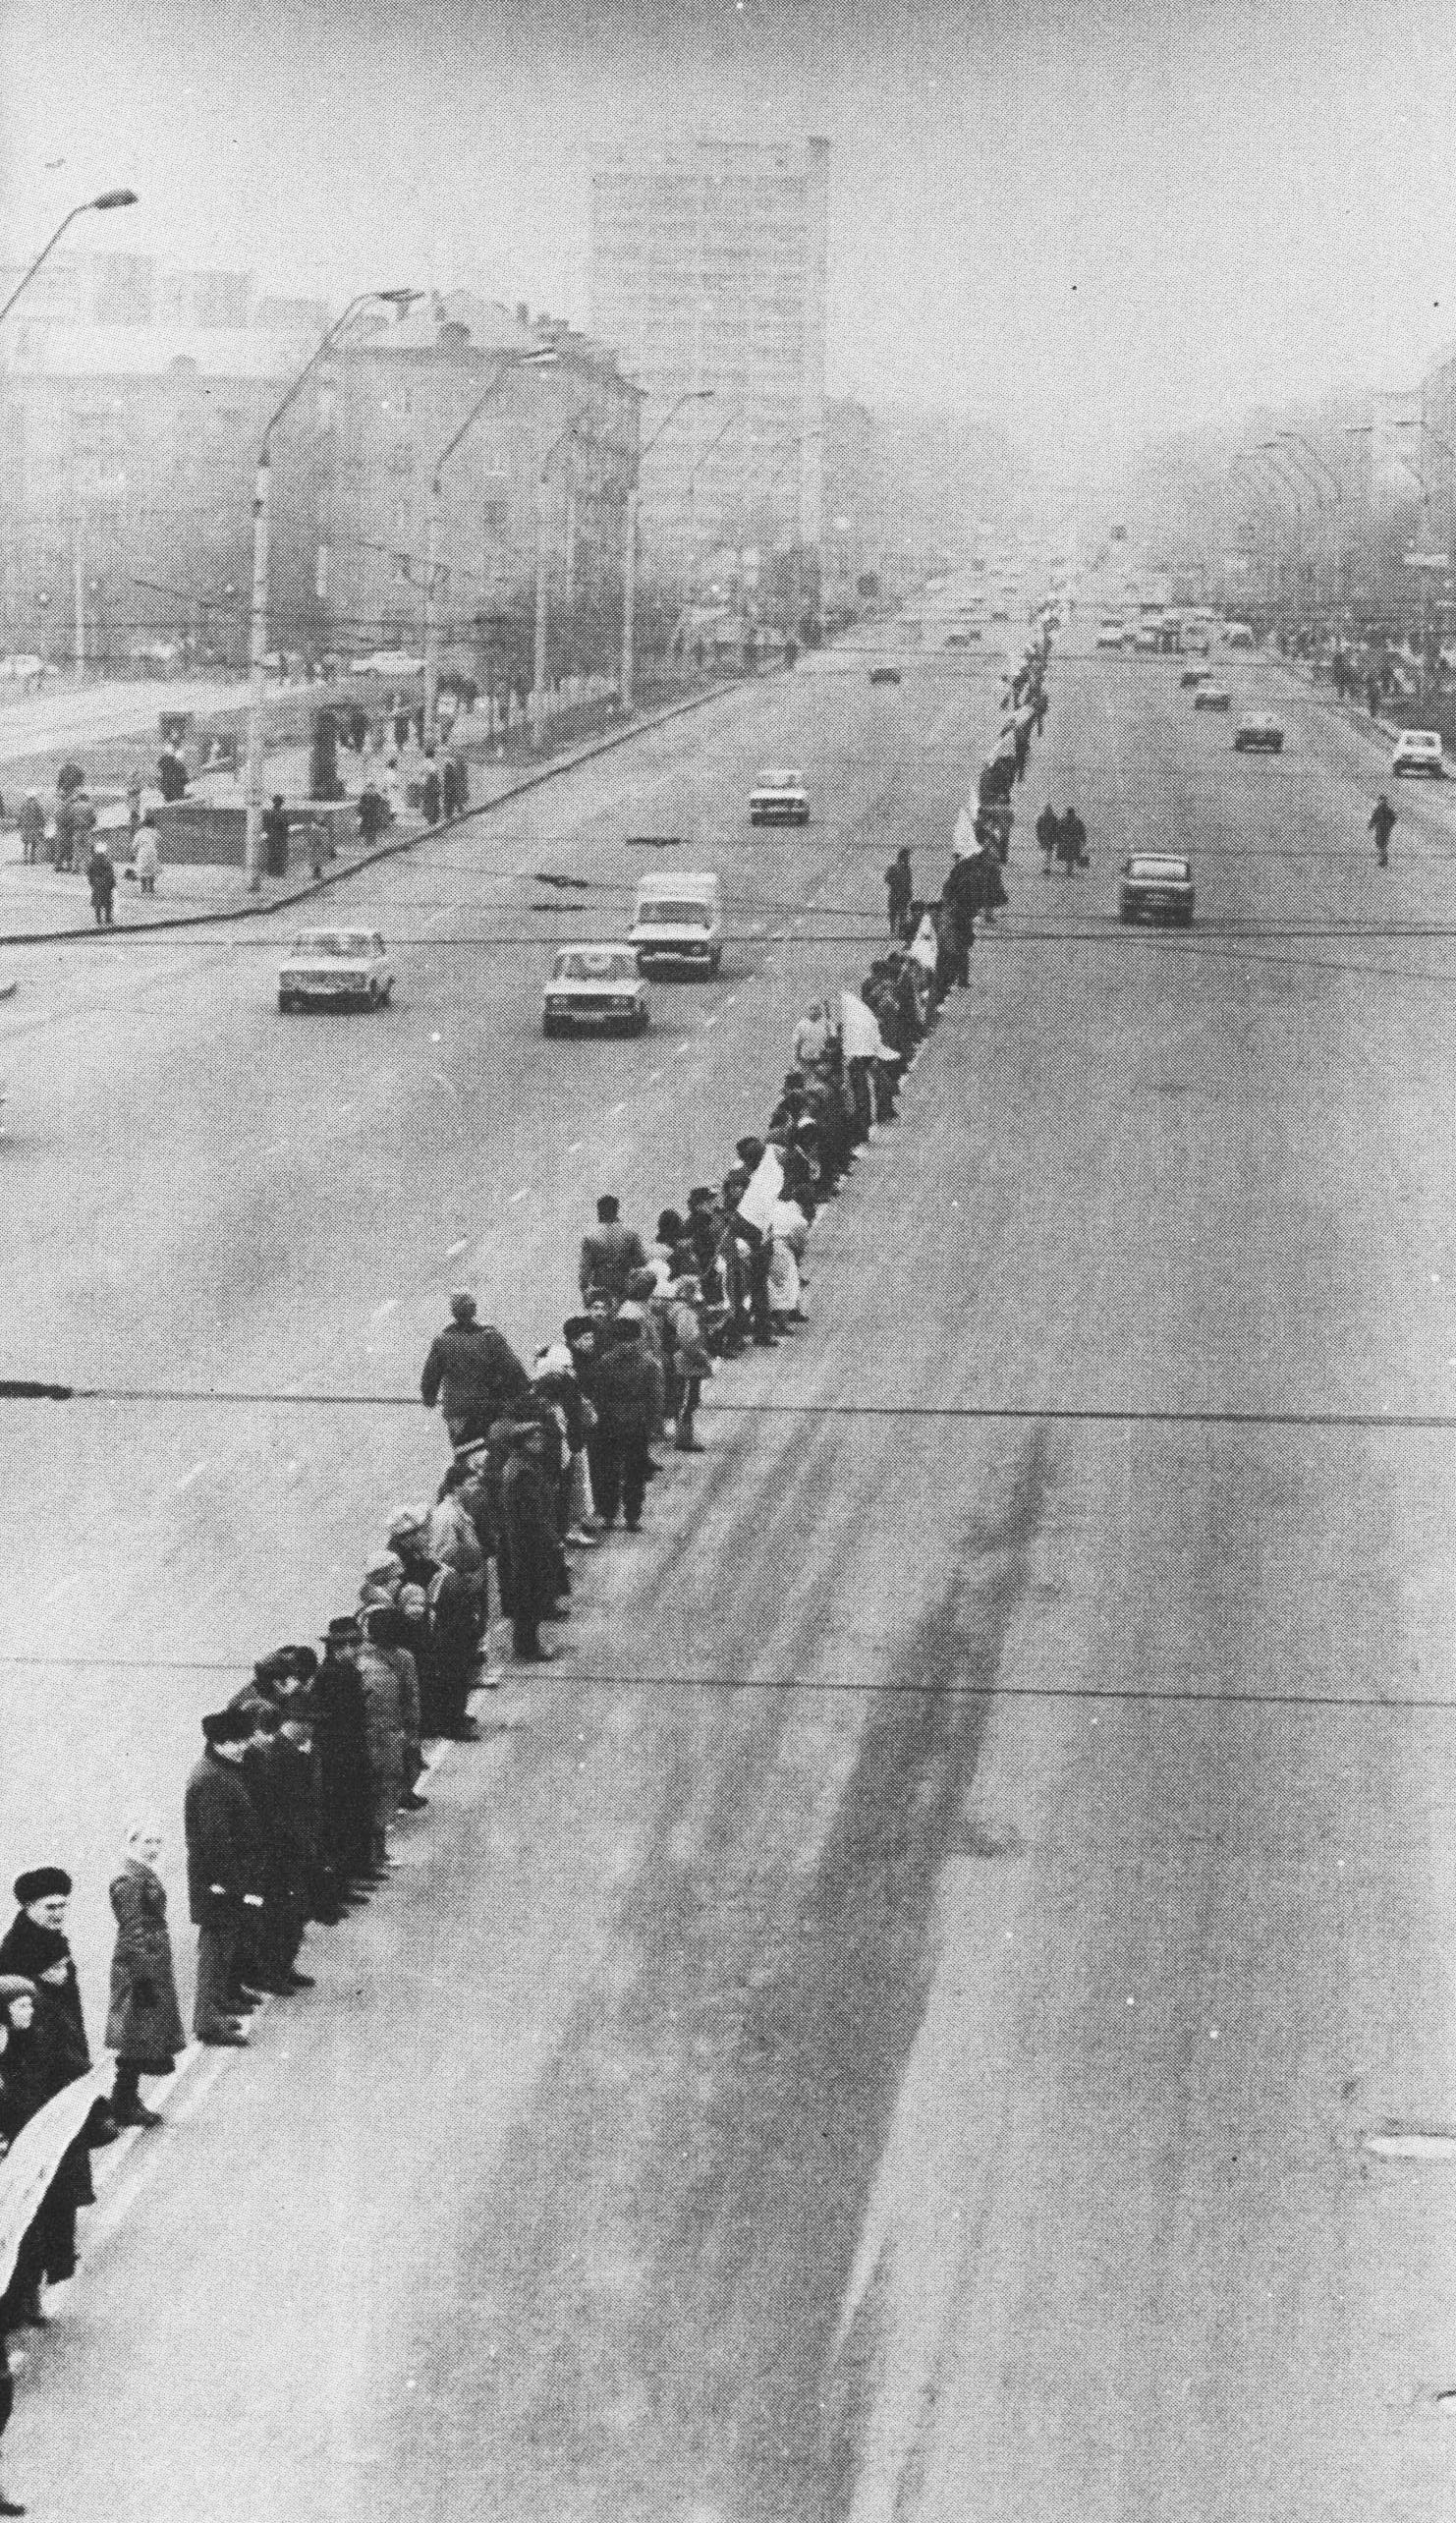 People form a human chain on the streets of Kiev, Ukraine in 1990. This was done to mark the Act of Unification of UPR and ZUNR as Ukraine pushes for its own independence. Long had it been one of the key territories of the USSR, it would peacefully get its wish in 1991. However, ever since and still to this day Ukraine has been a major player in the West vs the East chess game as it has active conflicts with Russian separatists going on right now.